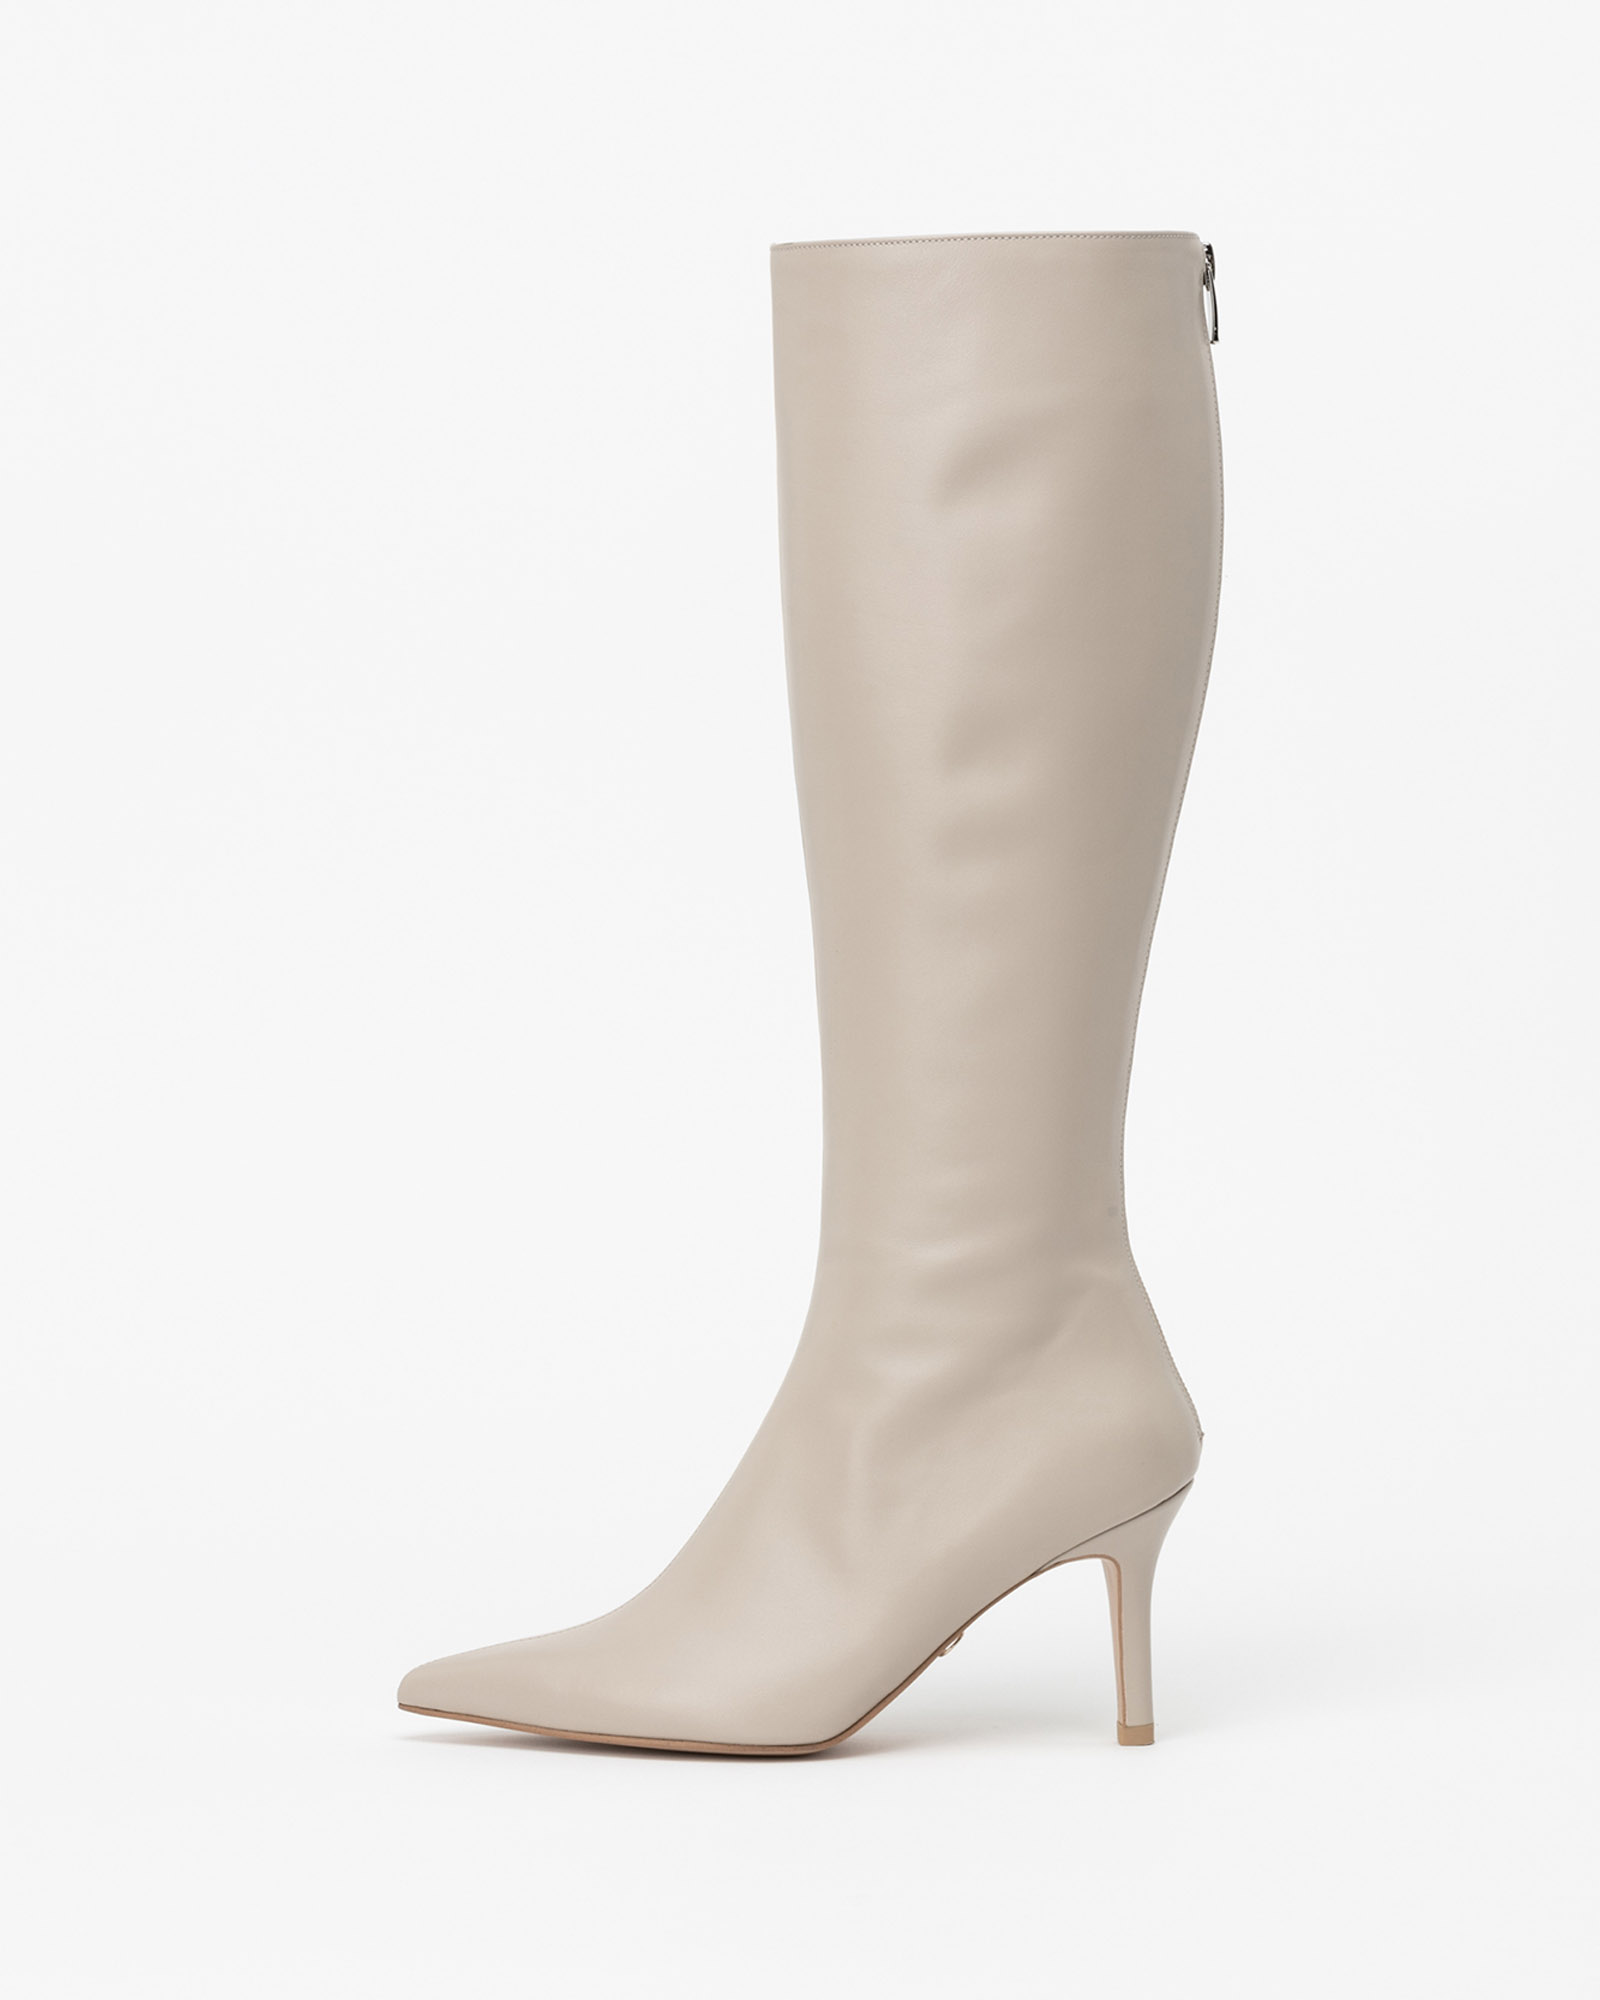 Deluxia Long Boots in Taupe Ivory